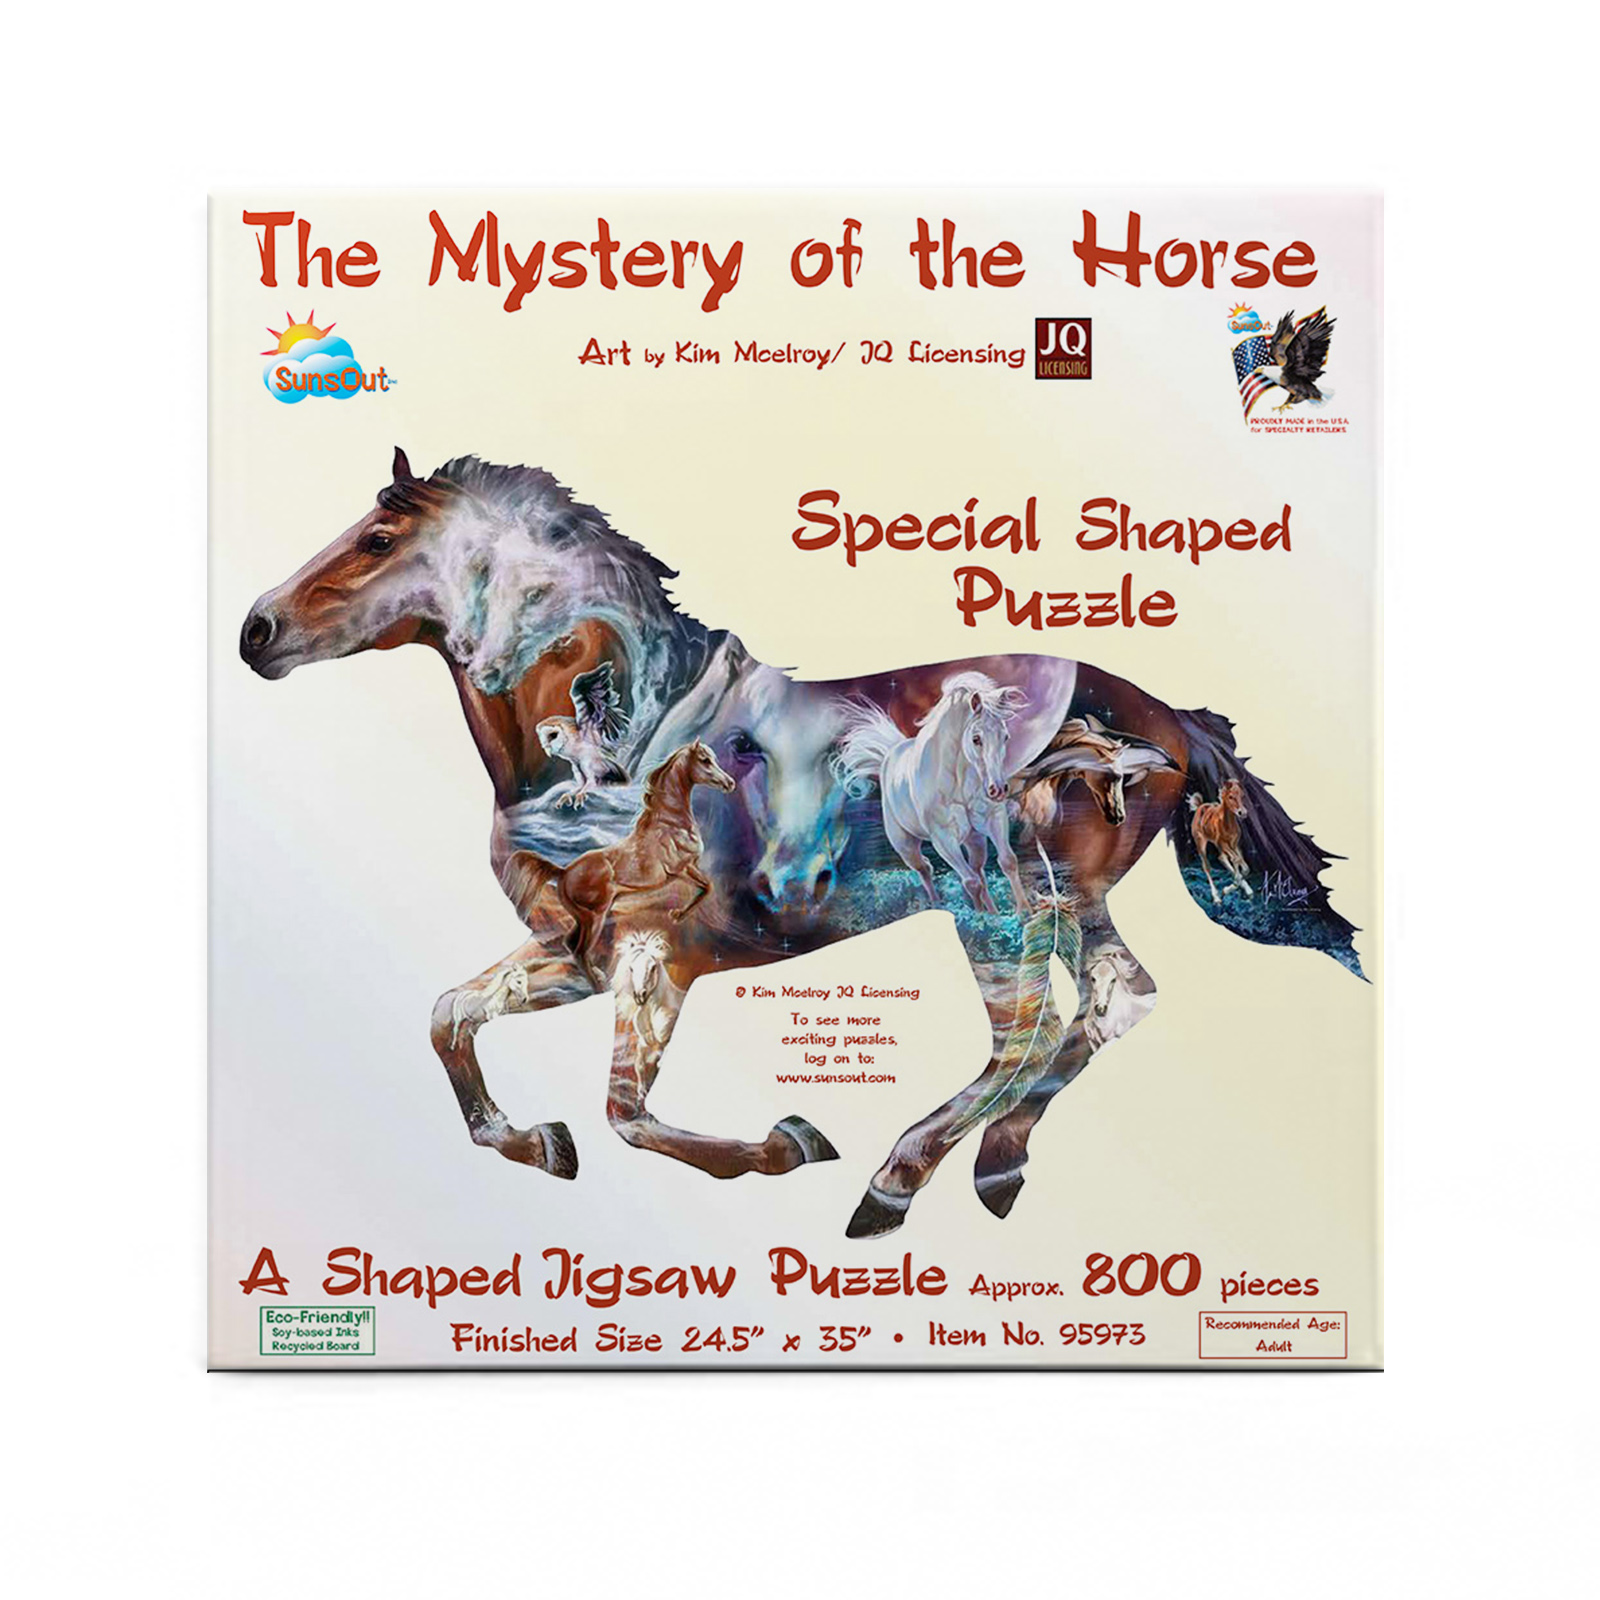 The Mystery of the Horse